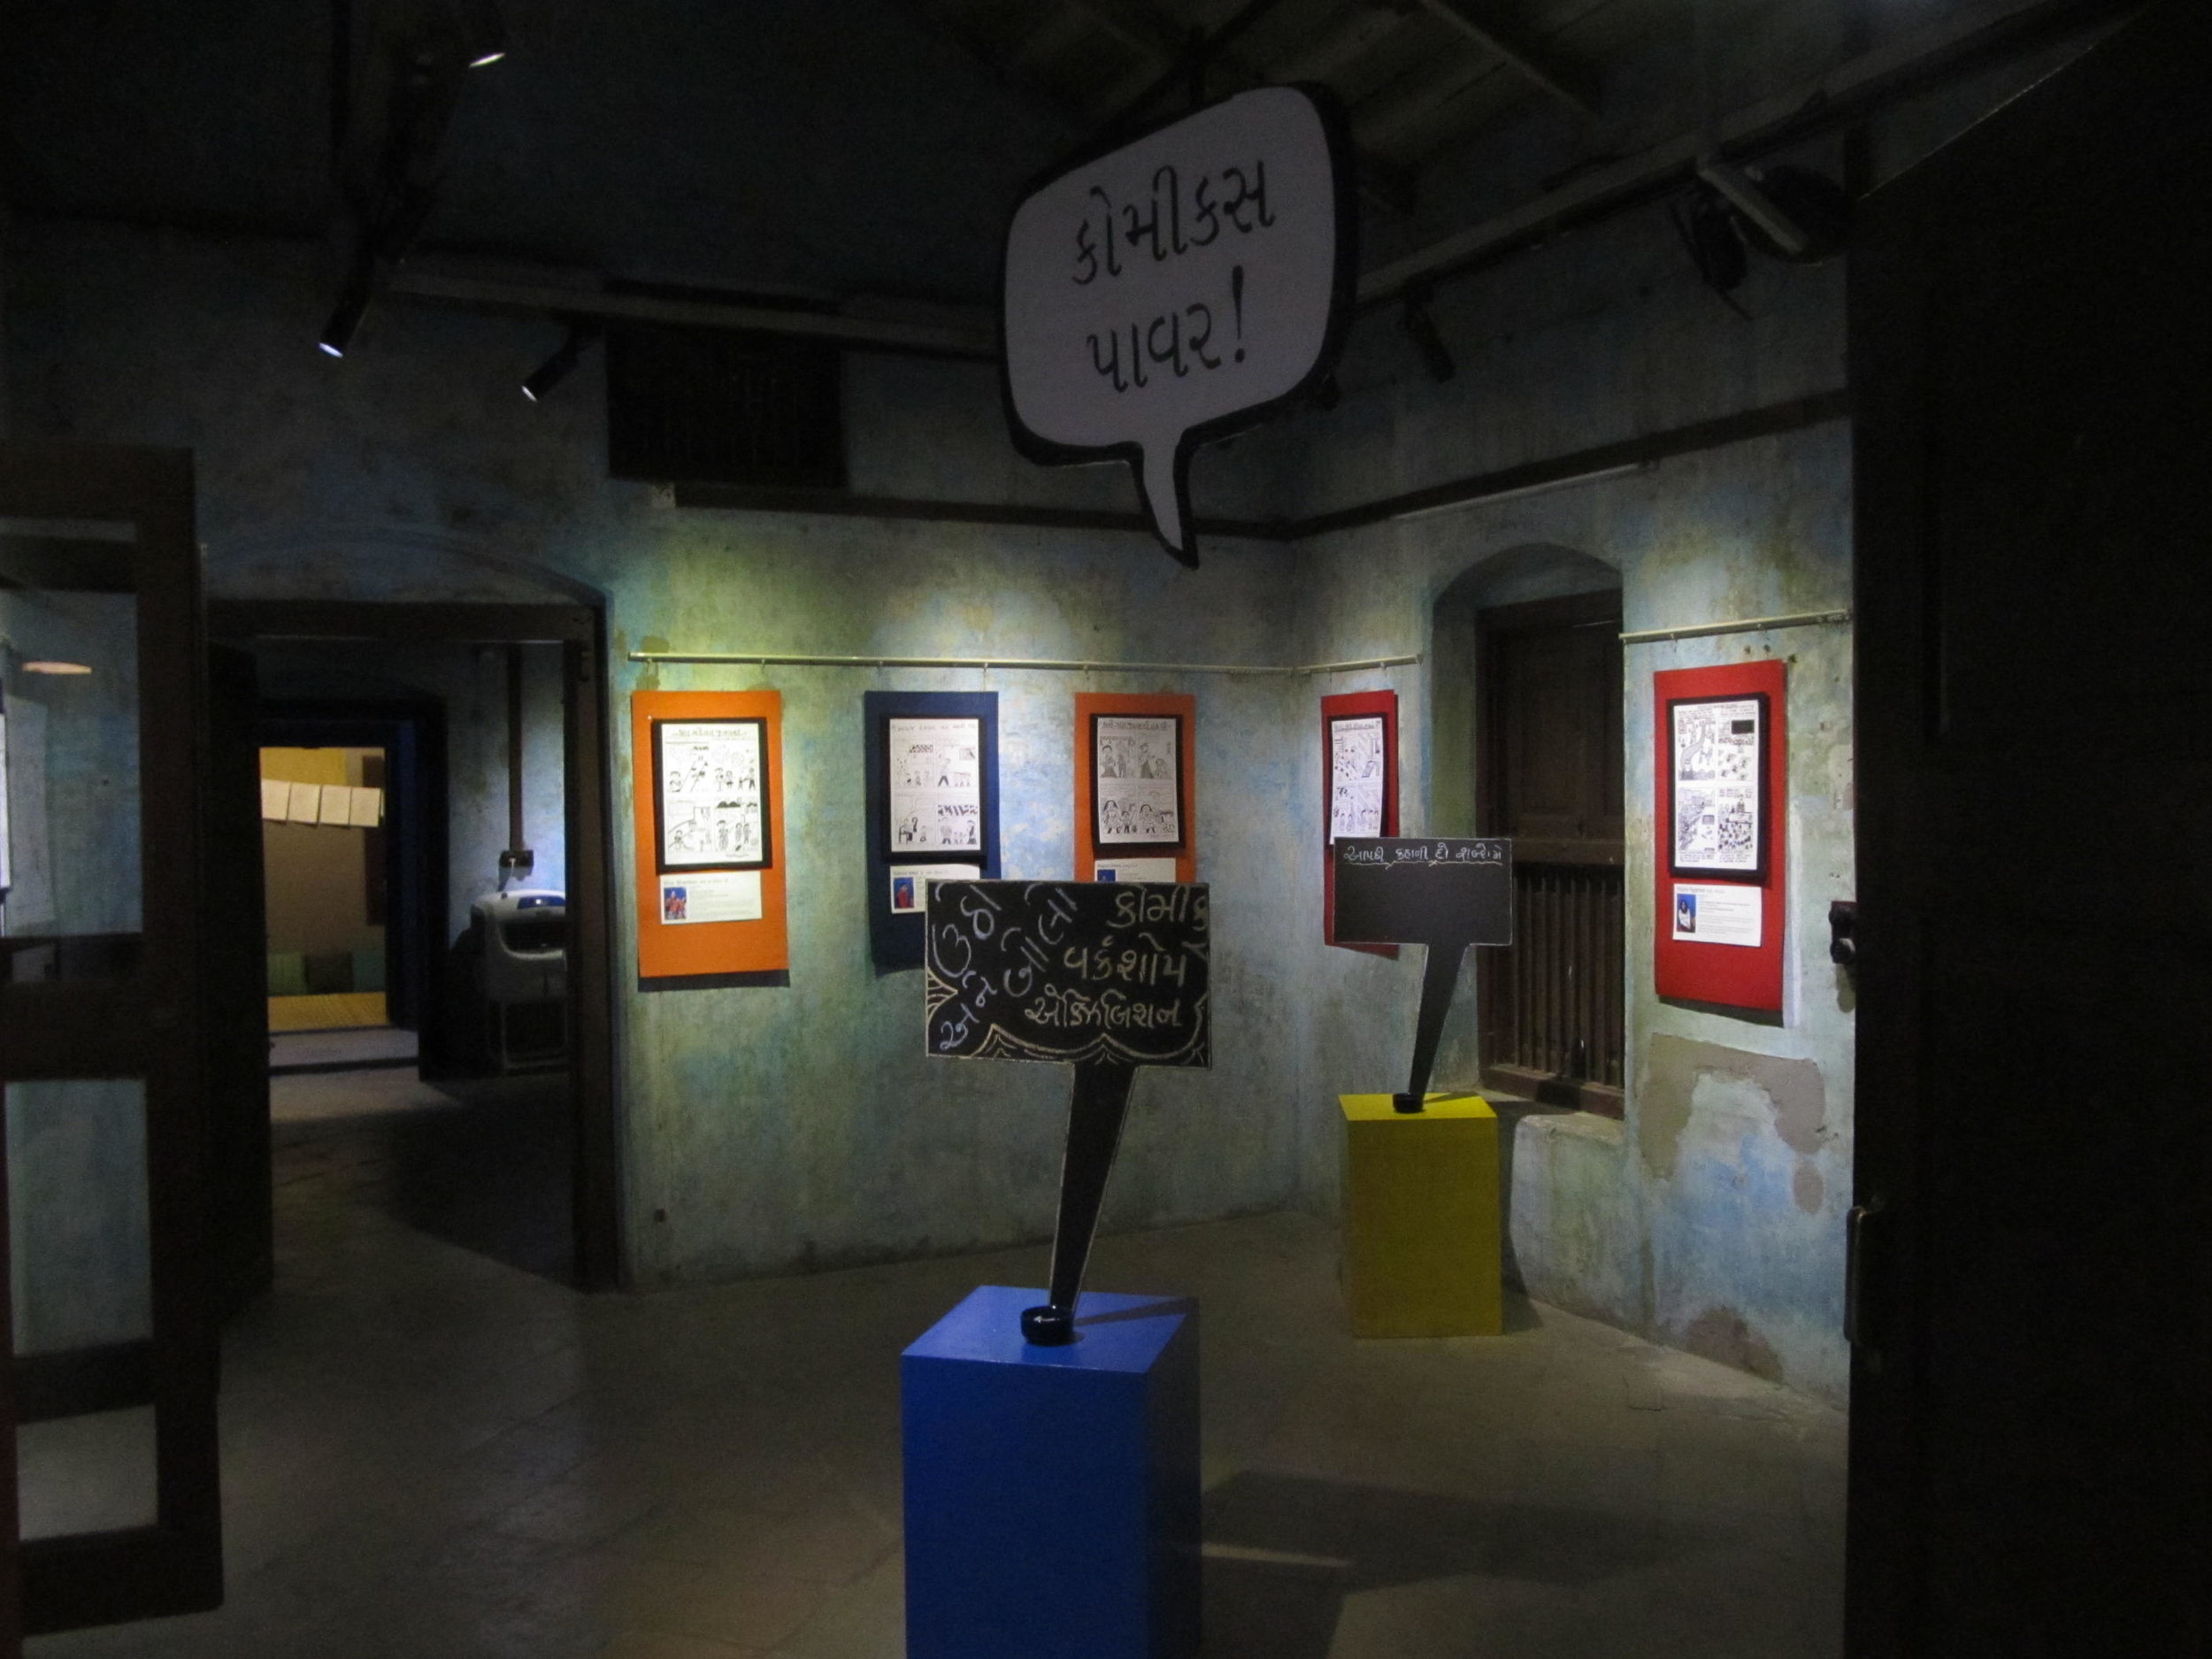 Final exhibition installed in the museum was interactive and bi-lingual, Gujarati & English.